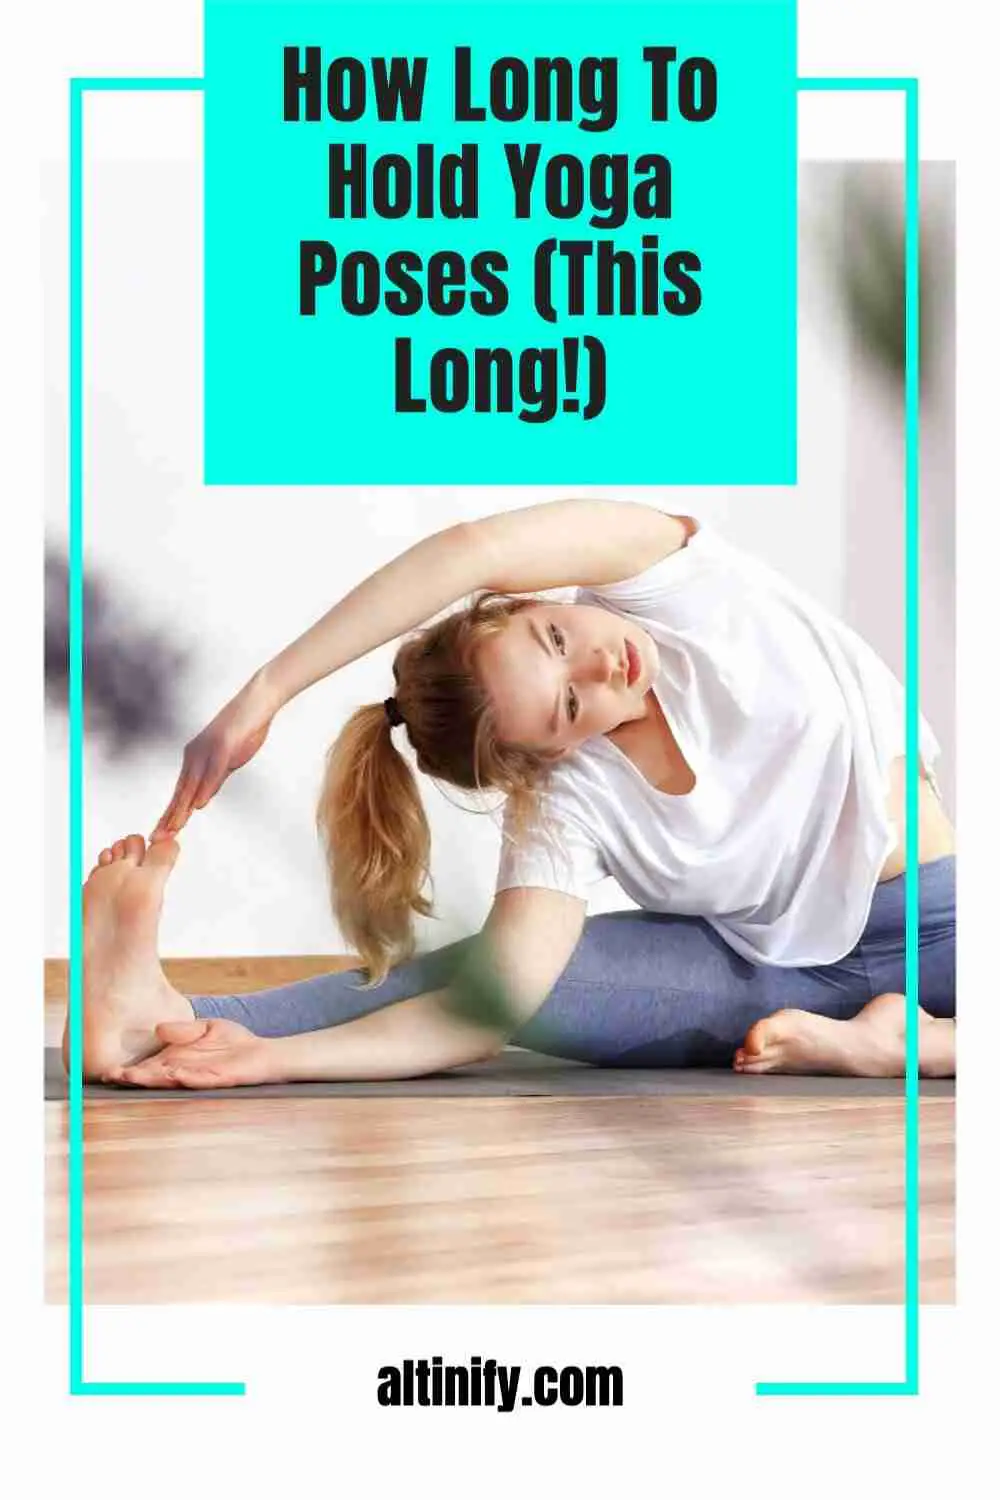 How Long To Hold Yoga Poses (This Long!)